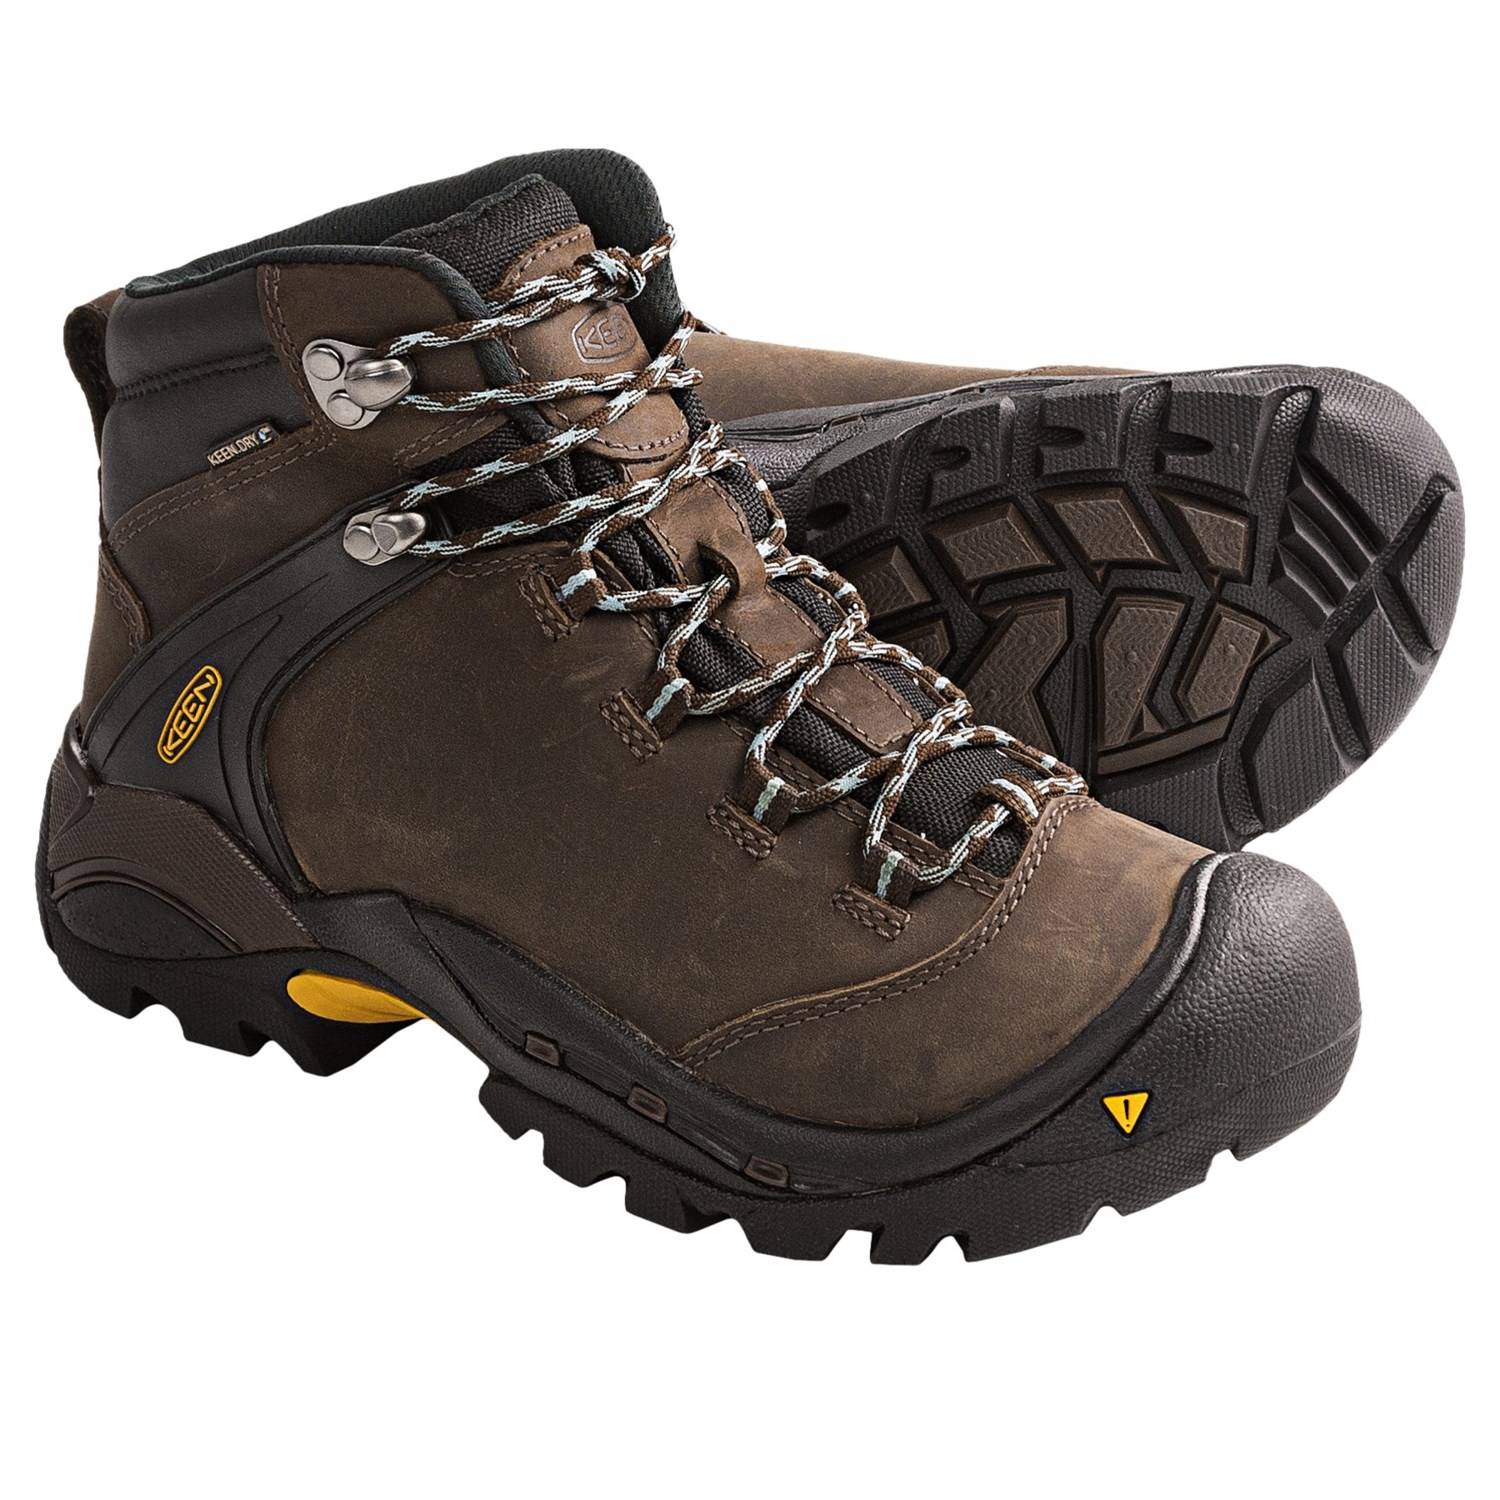 Keen Ketchum Leather Hiking Boots (For Women) 6741N - Save 25%